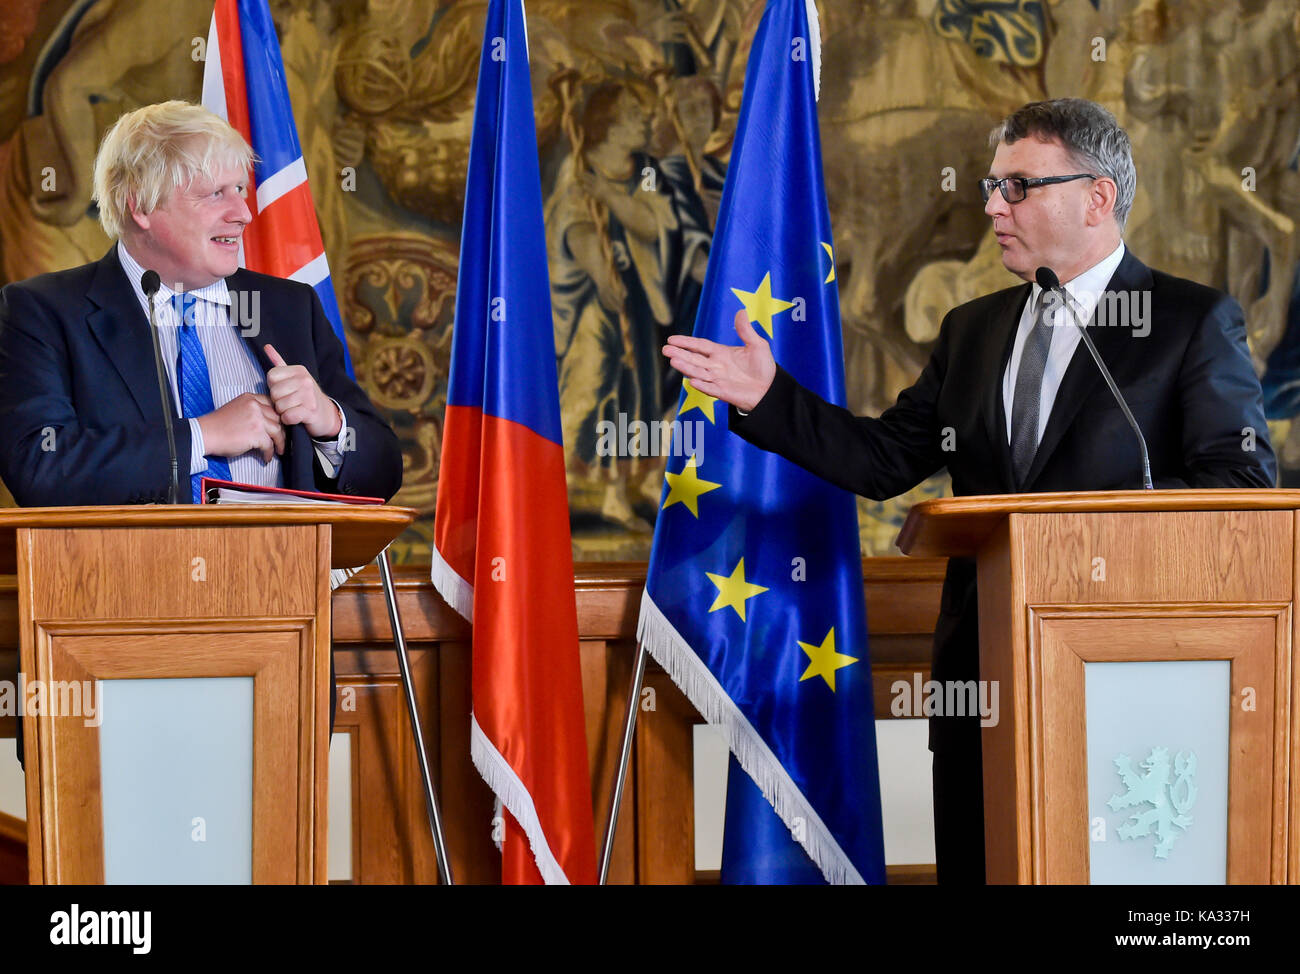 Prague, Czech Republic. 25th Sep, 2017. British Secretary of State for Foreign and Commonwealth Affairs Boris Johnson, left, and Czech Foreign Minister Lubomir Zaoralek meet to discuss Brexit and current geopolitical issues in Prague, Czech Republic, on Monday, September 25, 2017. Credit: Vit Simanek/CTK Photo/Alamy Live News Stock Photo